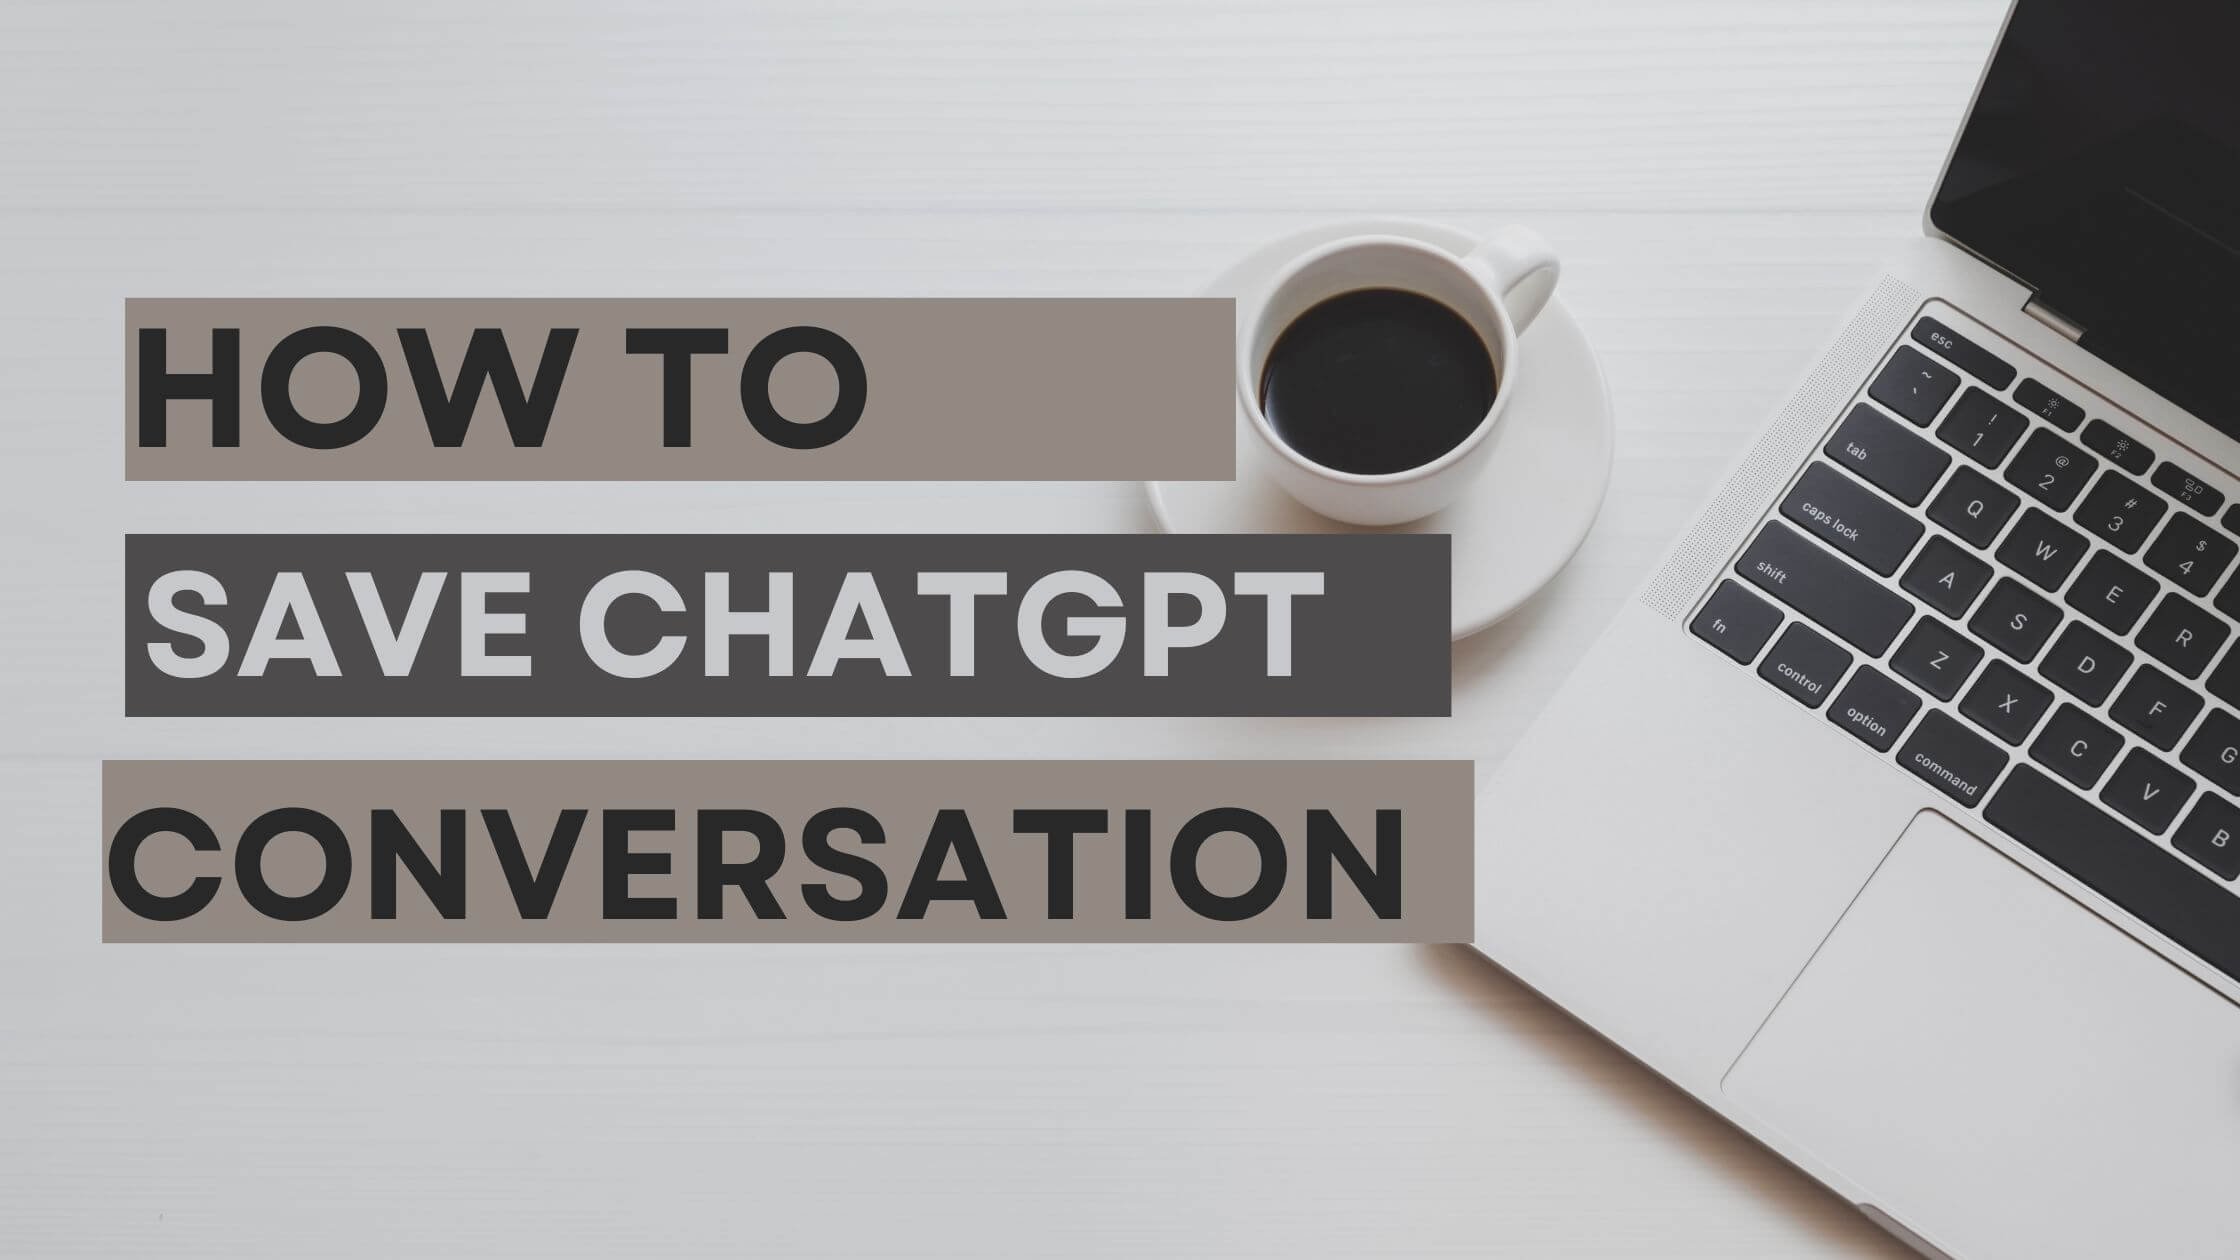 How to Save ChatGPT Conversation